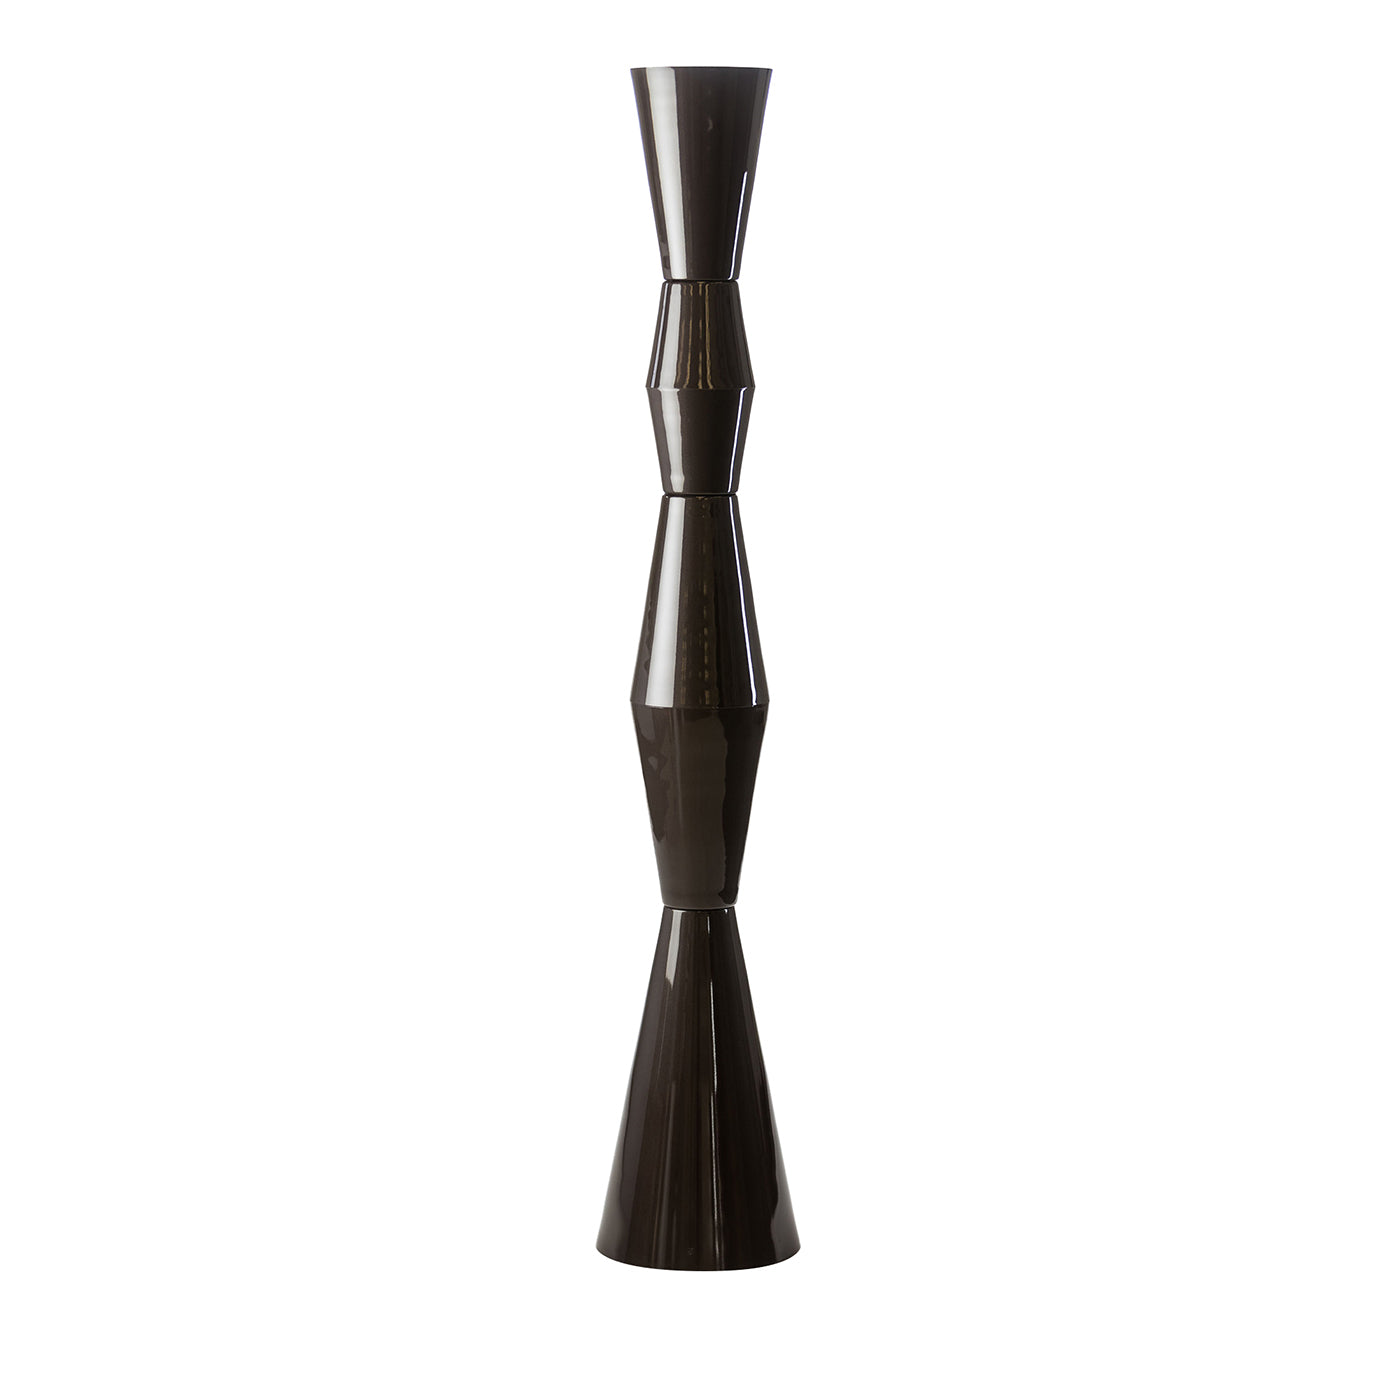 Ulus 170 Black Lamp by Marco Piva - Main view